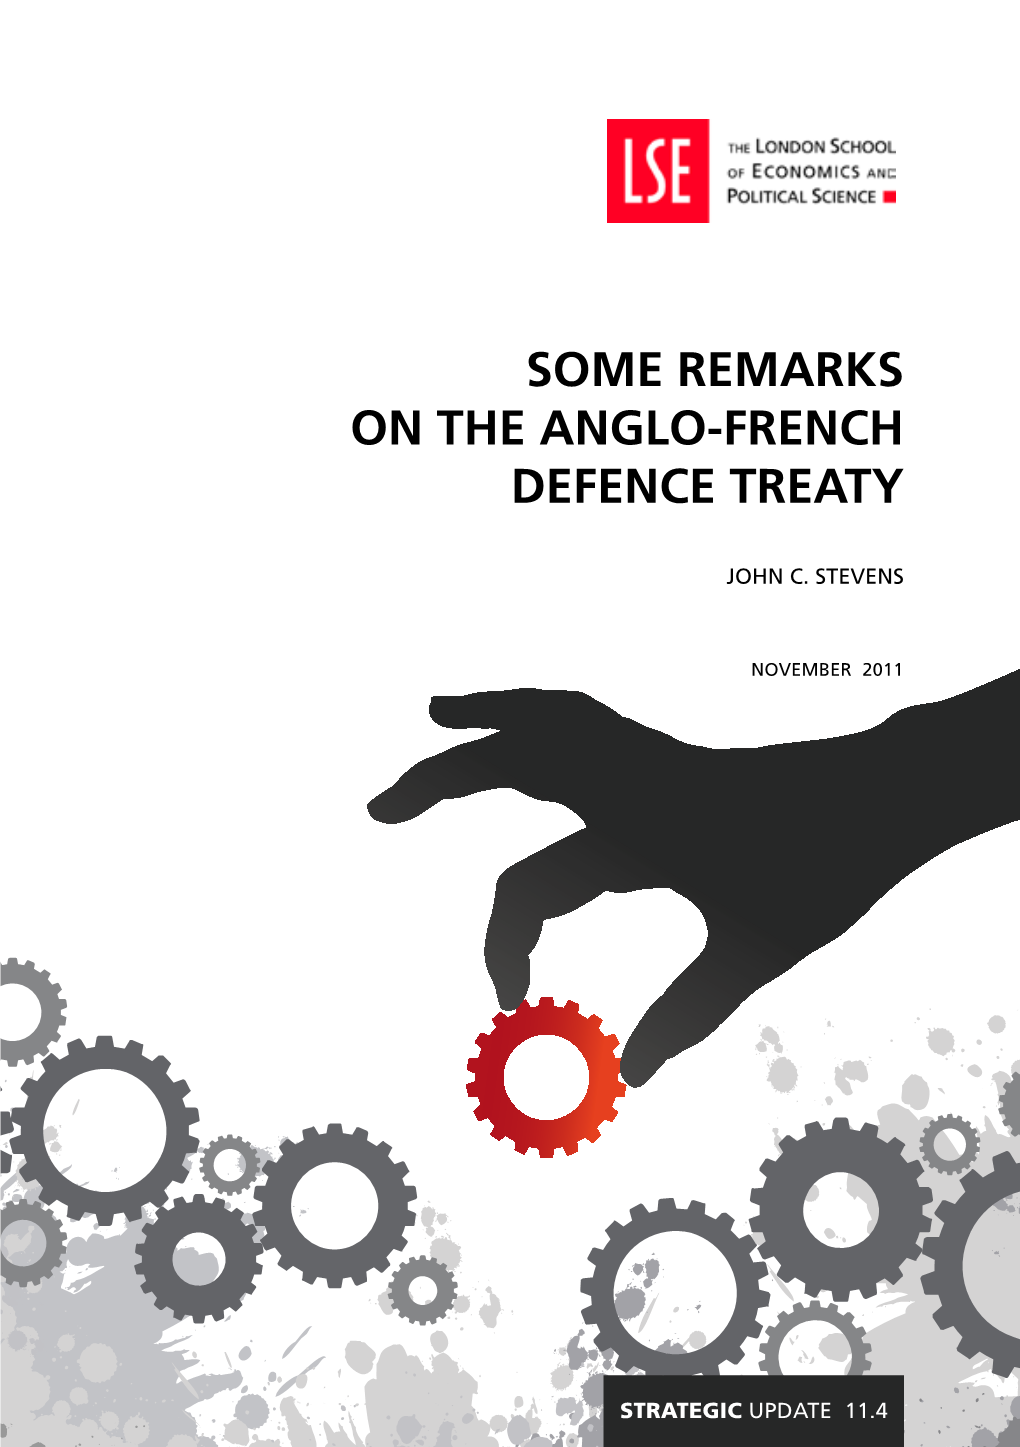 The Anglo French Defence Treaty